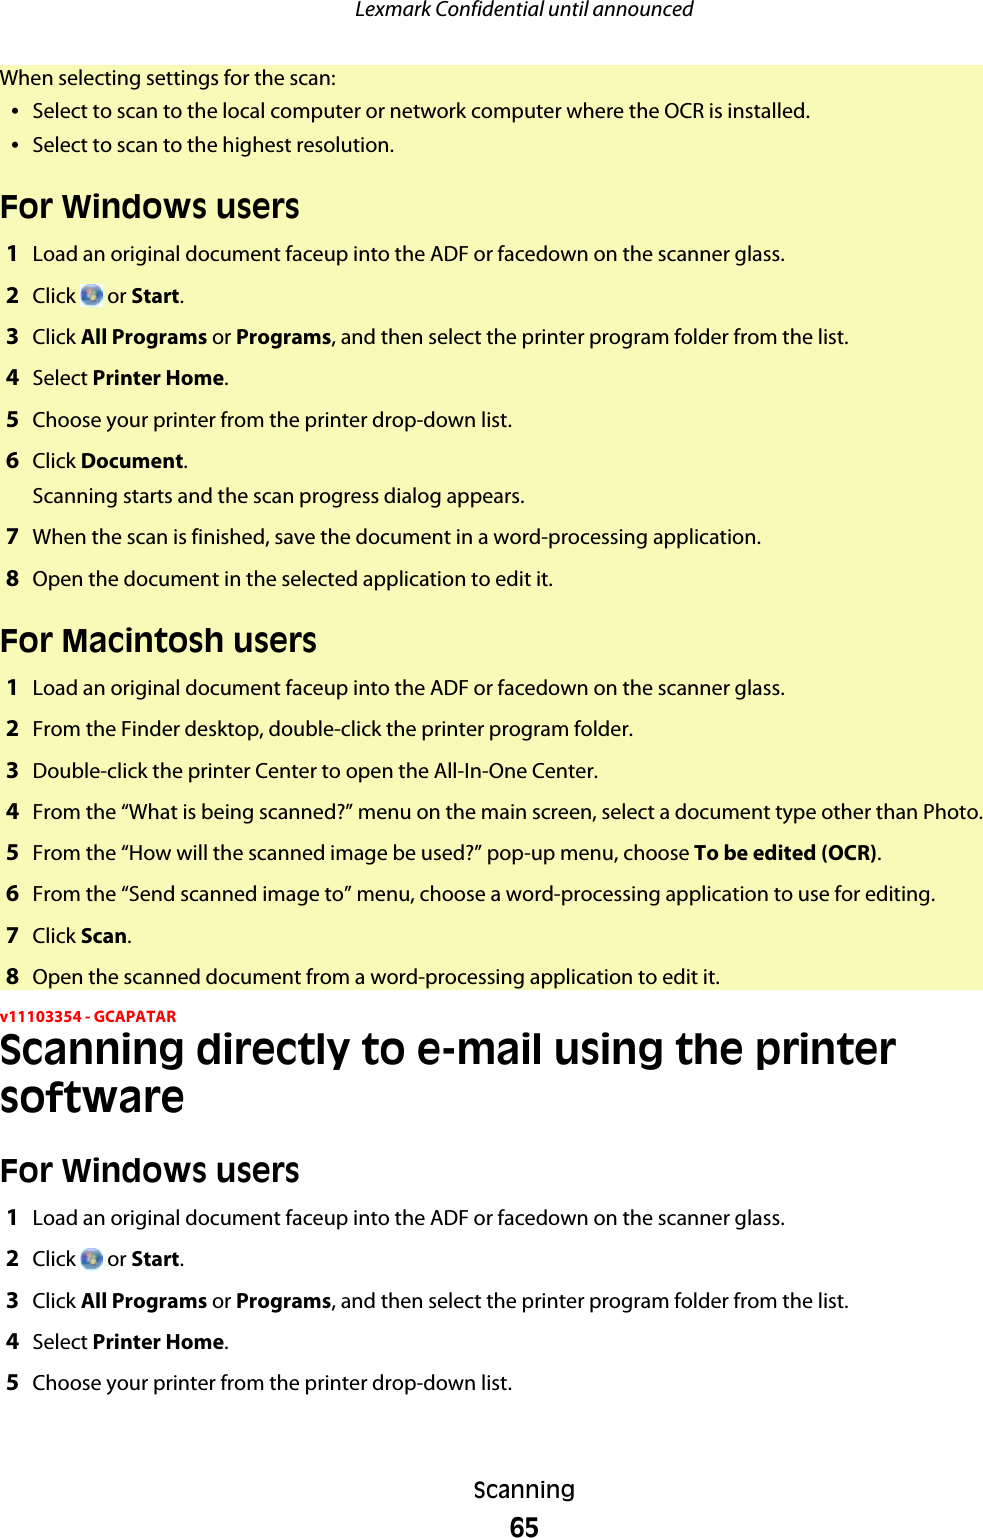 When selecting settings for the scan:•Select to scan to the local computer or network computer where the OCR is installed.•Select to scan to the highest resolution.For Windows users1Load an original document faceup into the ADF or facedown on the scanner glass.2Click   or Start.3Click All Programs or Programs, and then select the printer program folder from the list.4Select Printer Home.5Choose your printer from the printer drop-down list.6Click Document.Scanning starts and the scan progress dialog appears.7When the scan is finished, save the document in a word-processing application.8Open the document in the selected application to edit it.For Macintosh users1Load an original document faceup into the ADF or facedown on the scanner glass.2From the Finder desktop, double-click the printer program folder.3Double-click the printer Center to open the All-In-One Center.4From the “What is being scanned?” menu on the main screen, select a document type other than Photo.5From the “How will the scanned image be used?” pop-up menu, choose To be edited (OCR).6From the “Send scanned image to” menu, choose a word-processing application to use for editing.7Click Scan.8Open the scanned document from a word-processing application to edit it.v11103354 - GCAPATARScanning directly to e-mail using the printersoftwareFor Windows users1Load an original document faceup into the ADF or facedown on the scanner glass.2Click   or Start.3Click All Programs or Programs, and then select the printer program folder from the list.4Select Printer Home.5Choose your printer from the printer drop-down list.Lexmark Confidential until announcedScanning65